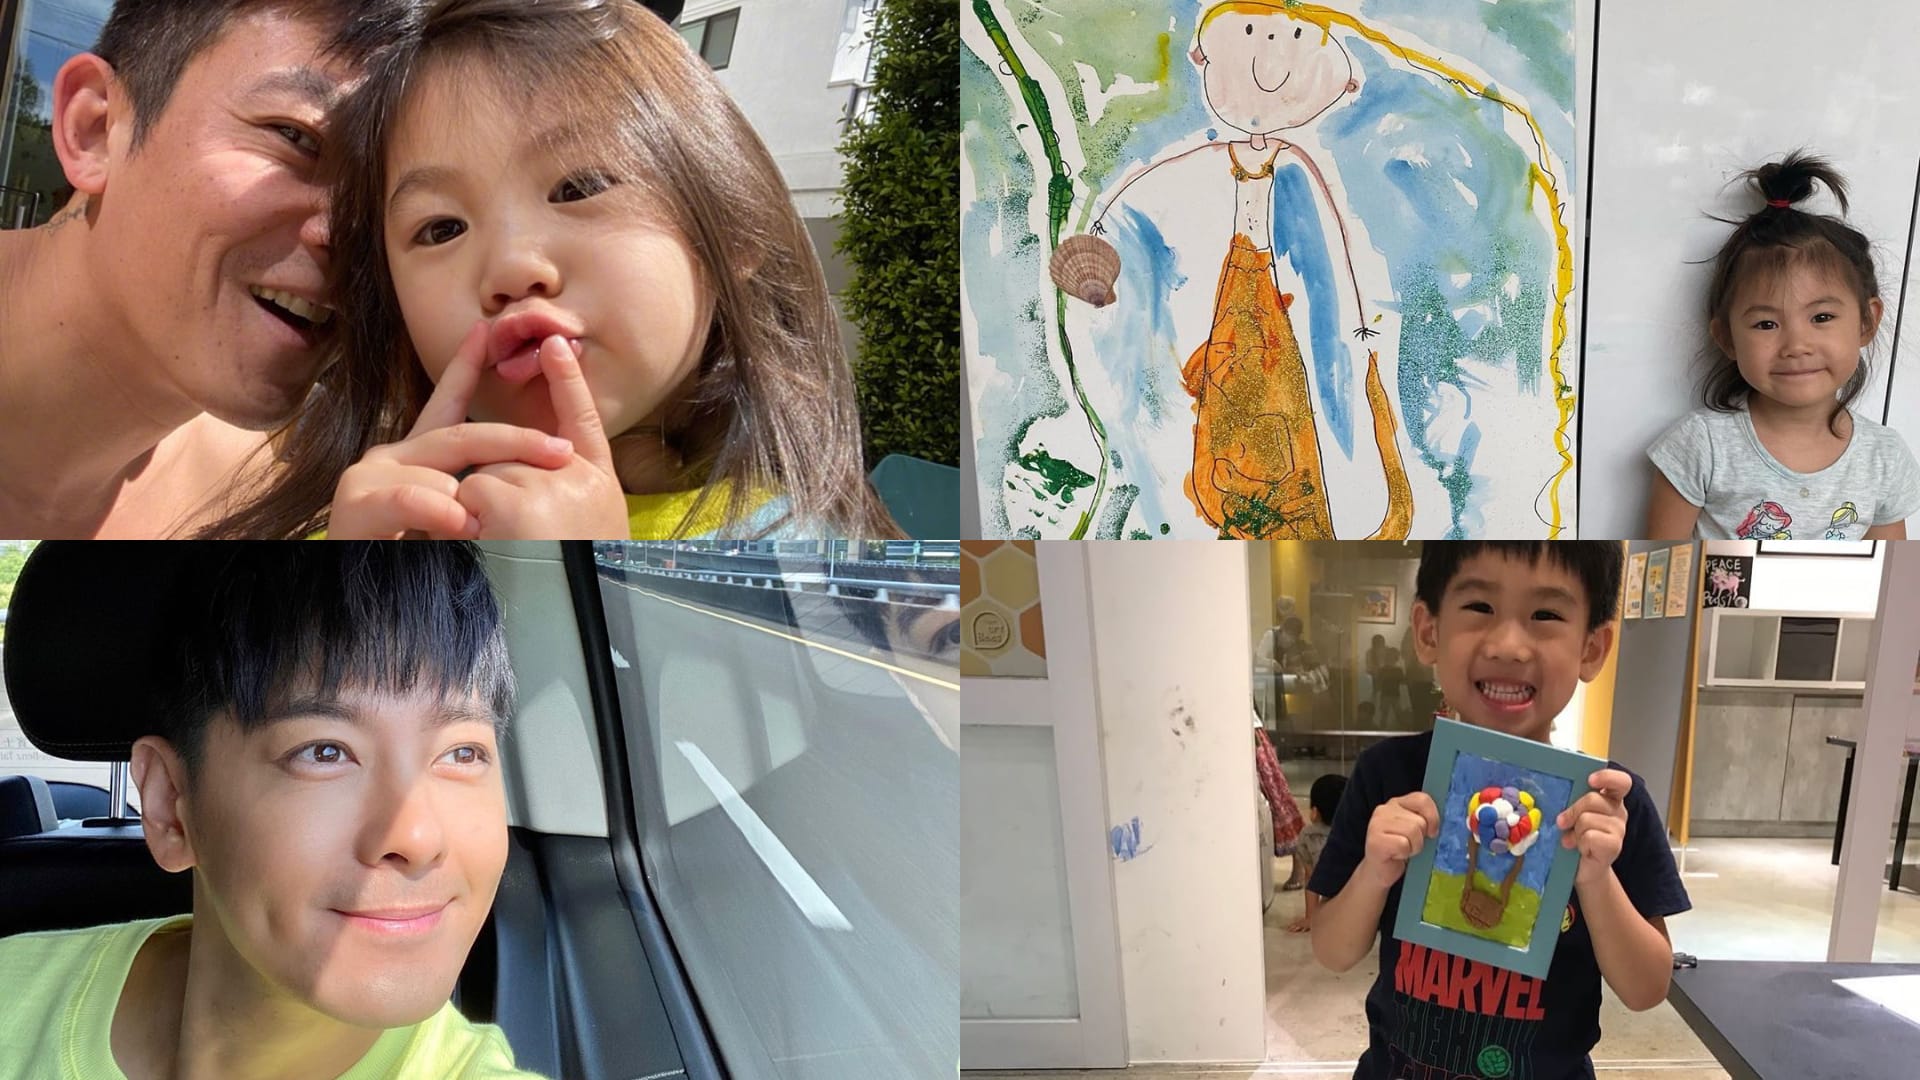 Edison Chen and Jimmy Lin Show Off Their Kids' Adorable Artwork